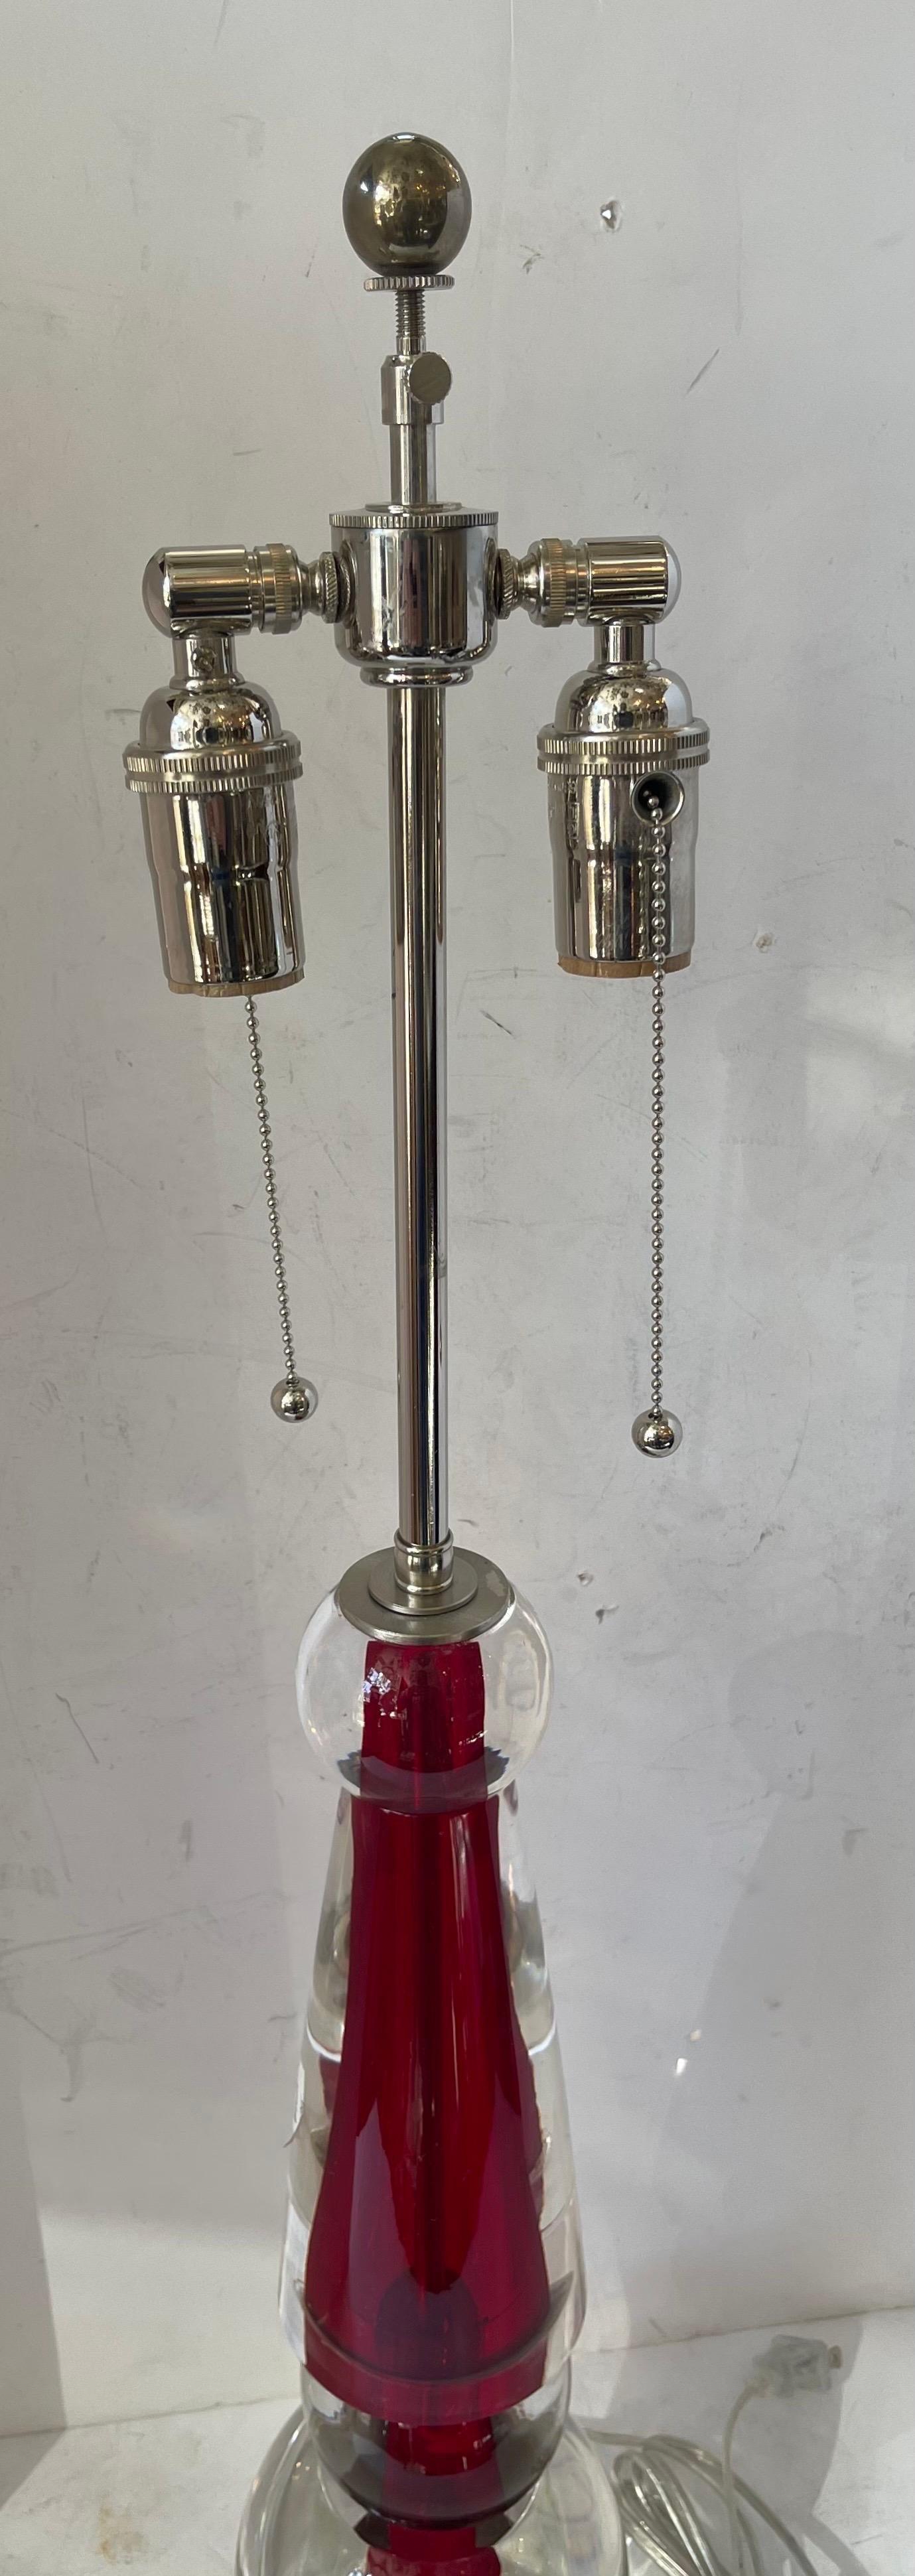 A Wonderful Mid Century Modern Murano / Venetian Lorin Marsh Red Clear Glass Table Lamp Rewired With Two Edison Nickel Sockets.
Original Showroom Sticker Still Attached With List Price Of $4,495
On The Bottom, Sticker Reads:  Lm Solidglace. T.CR